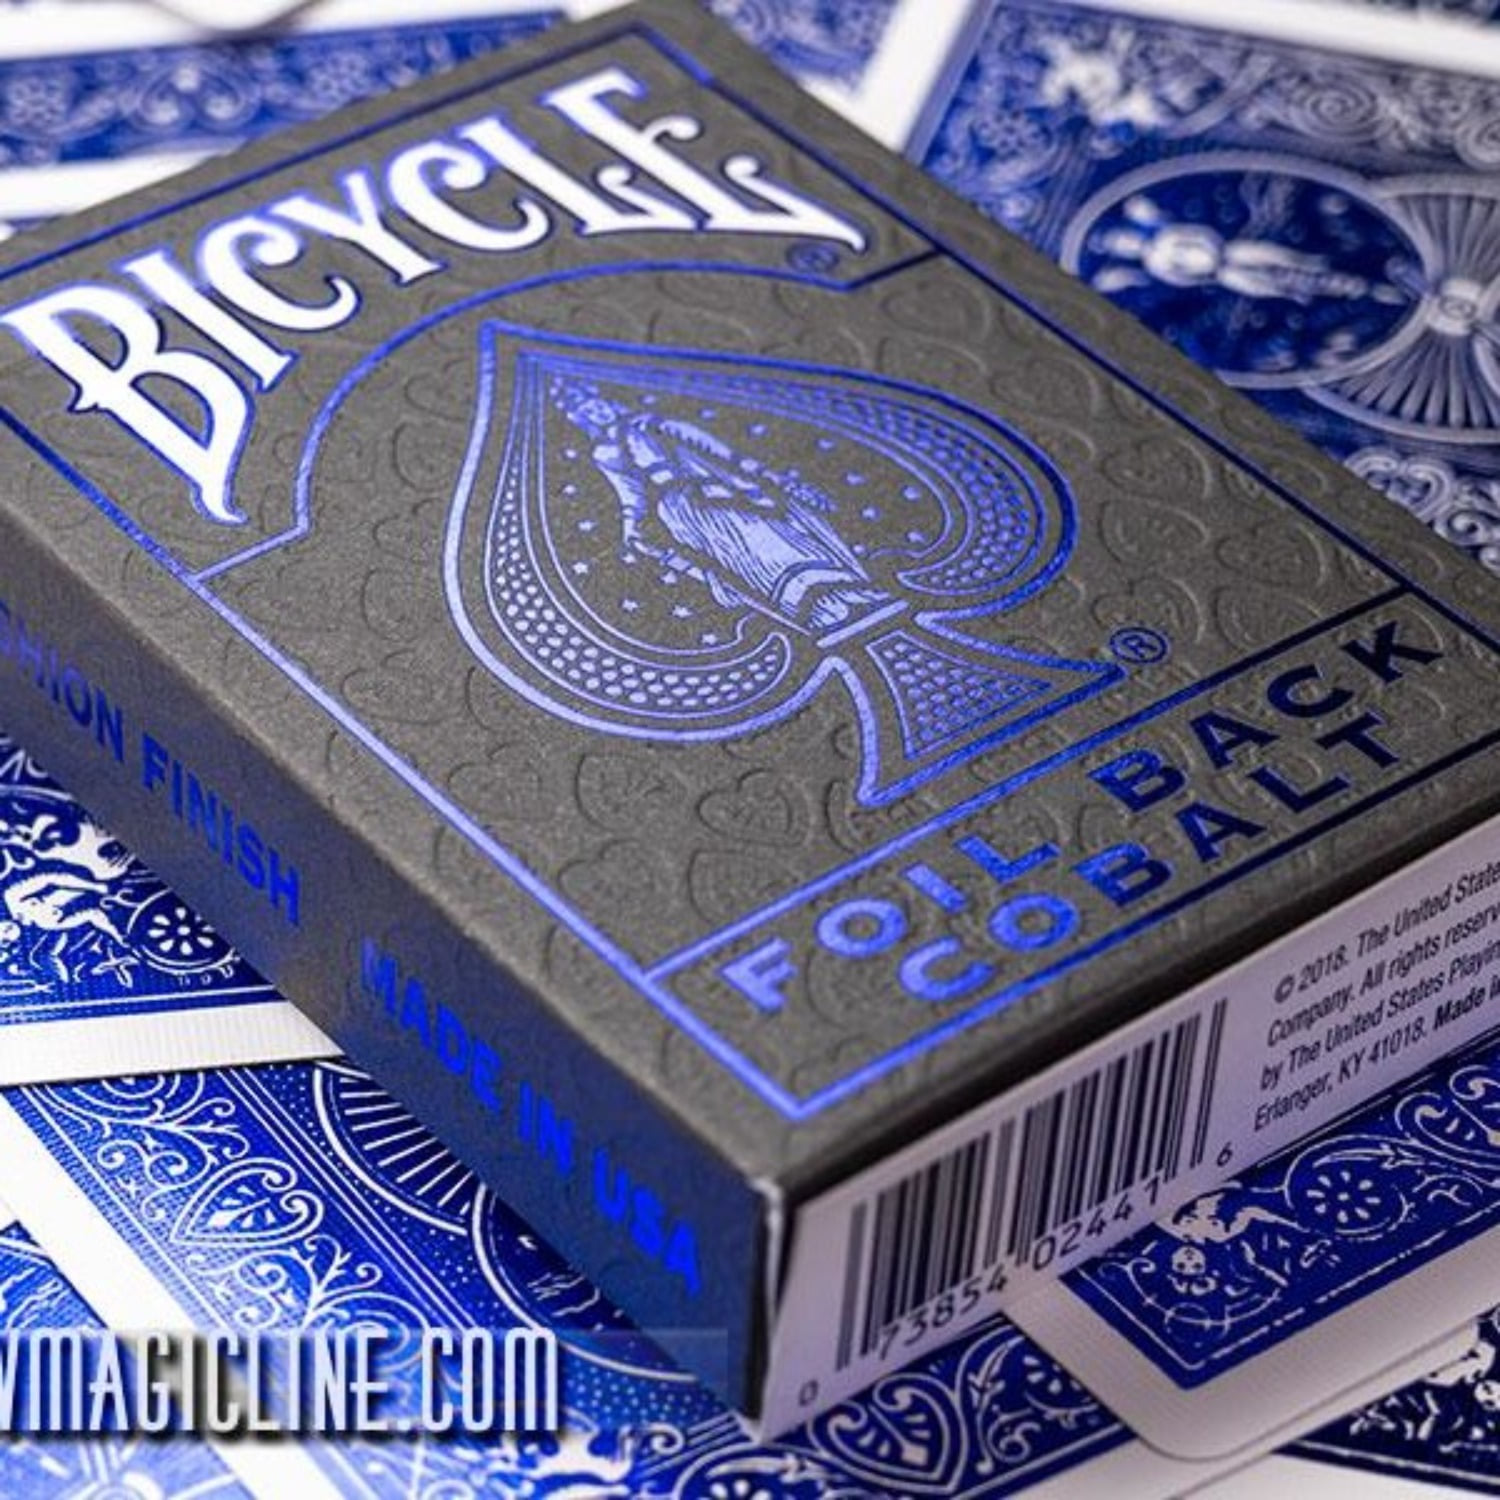 [Blue 코발트럭스 V2] Bicycle Rider Back Cobalt Luxe (Blue) Version 2 by US Playing Card Co